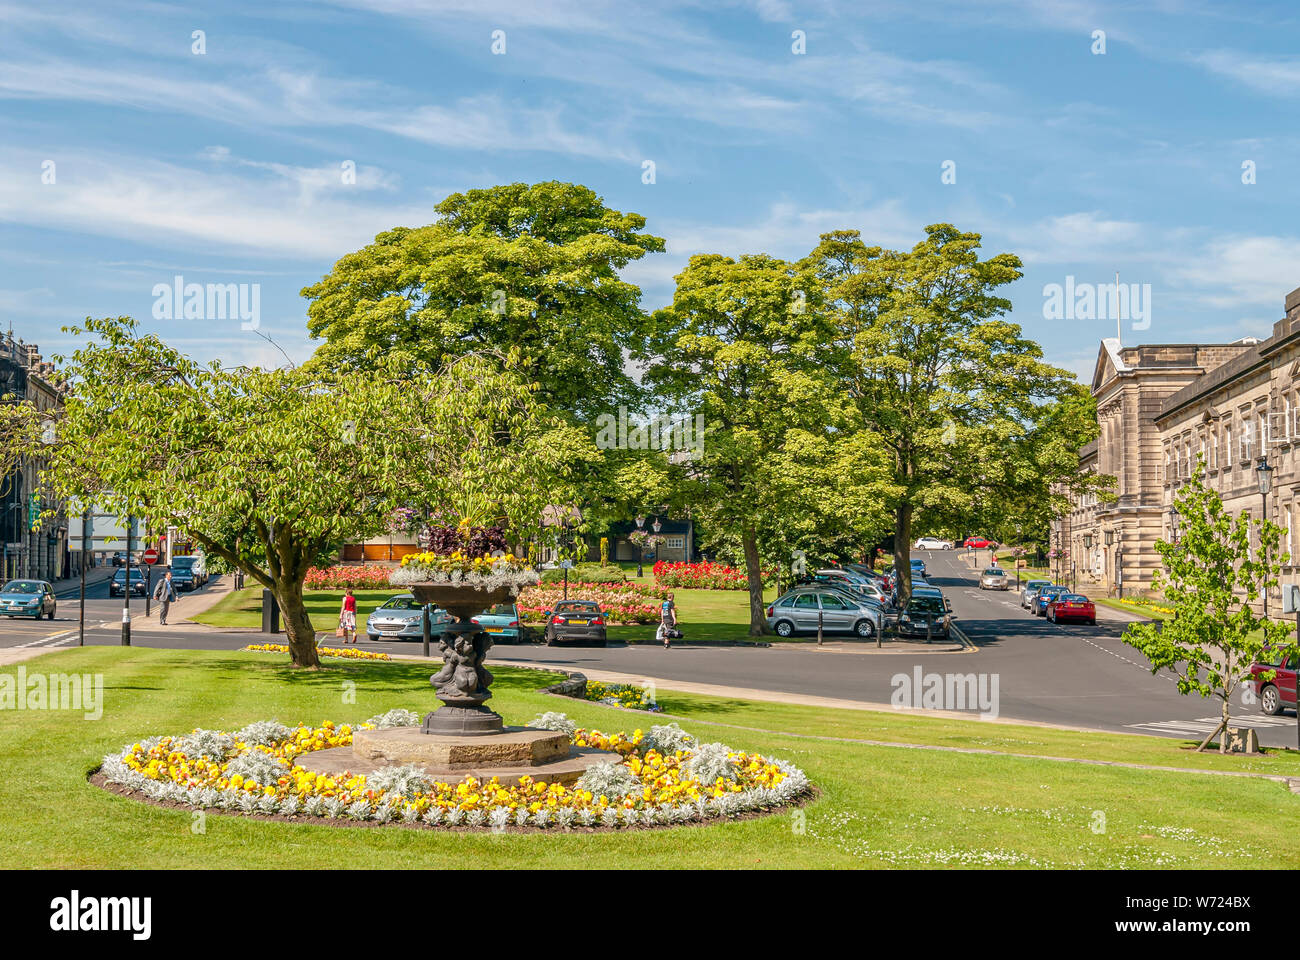 Harrogate (or Harrogate Spa) is a spa town in North Yorkshire, England. Stock Photo